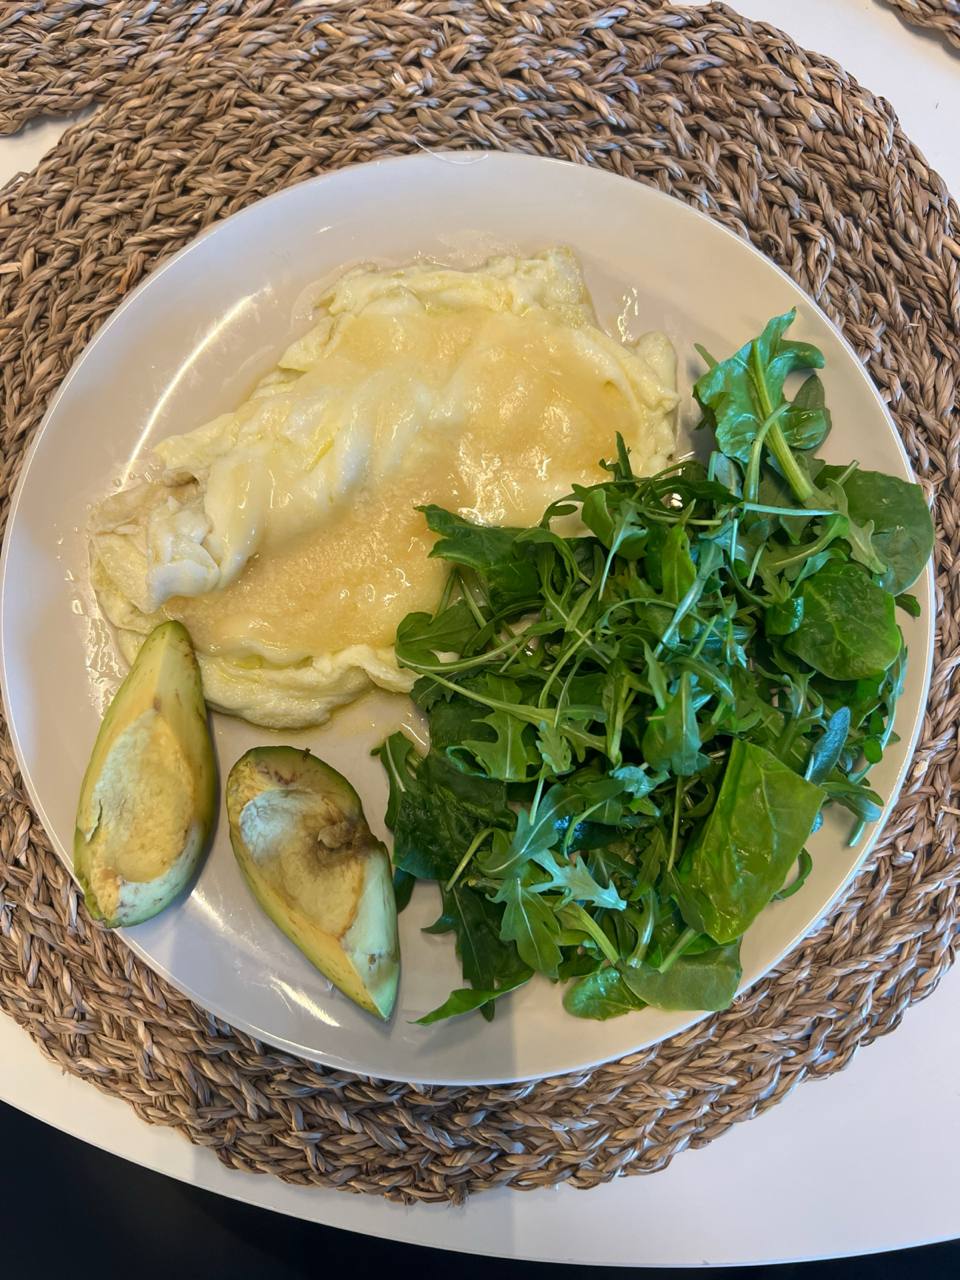 Omelette With Arugula Salad And Avocado